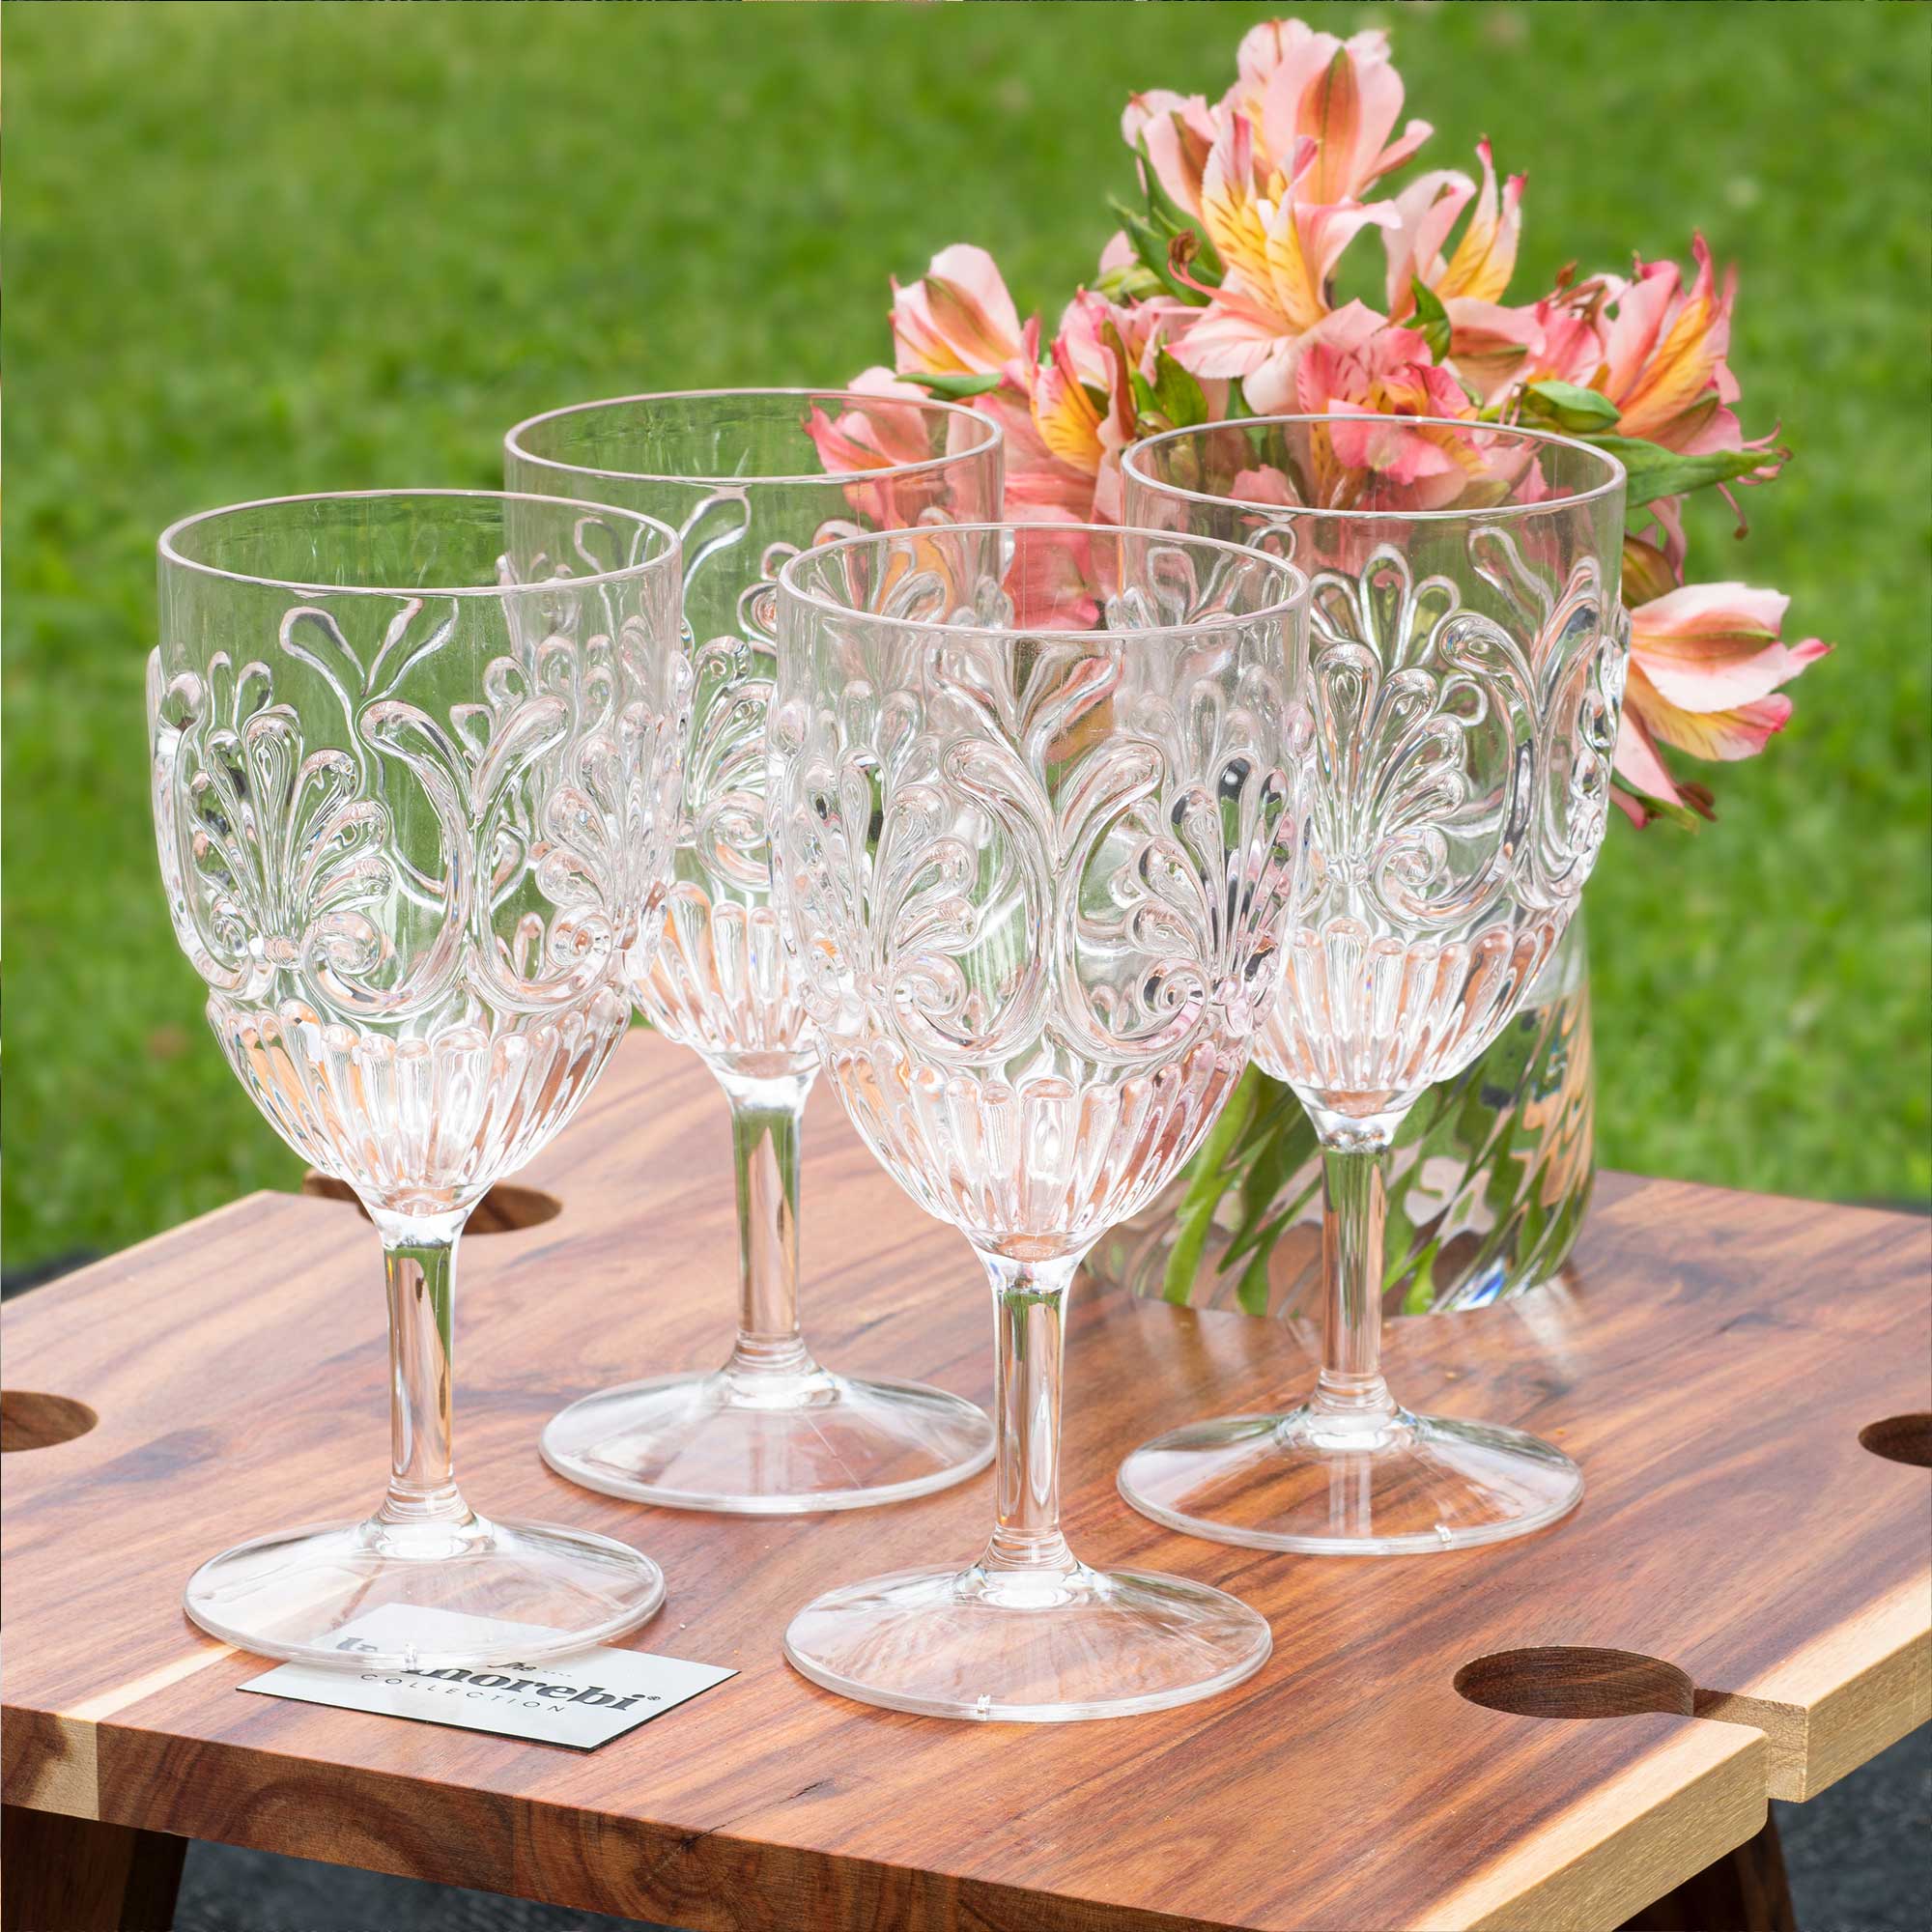 Lily's Home Unbreakable Stemmed Red Wine Glasses, Made of Non Breakable Shatterproof Plastic, Indoor and Outdoor Drinkware, Reusable and